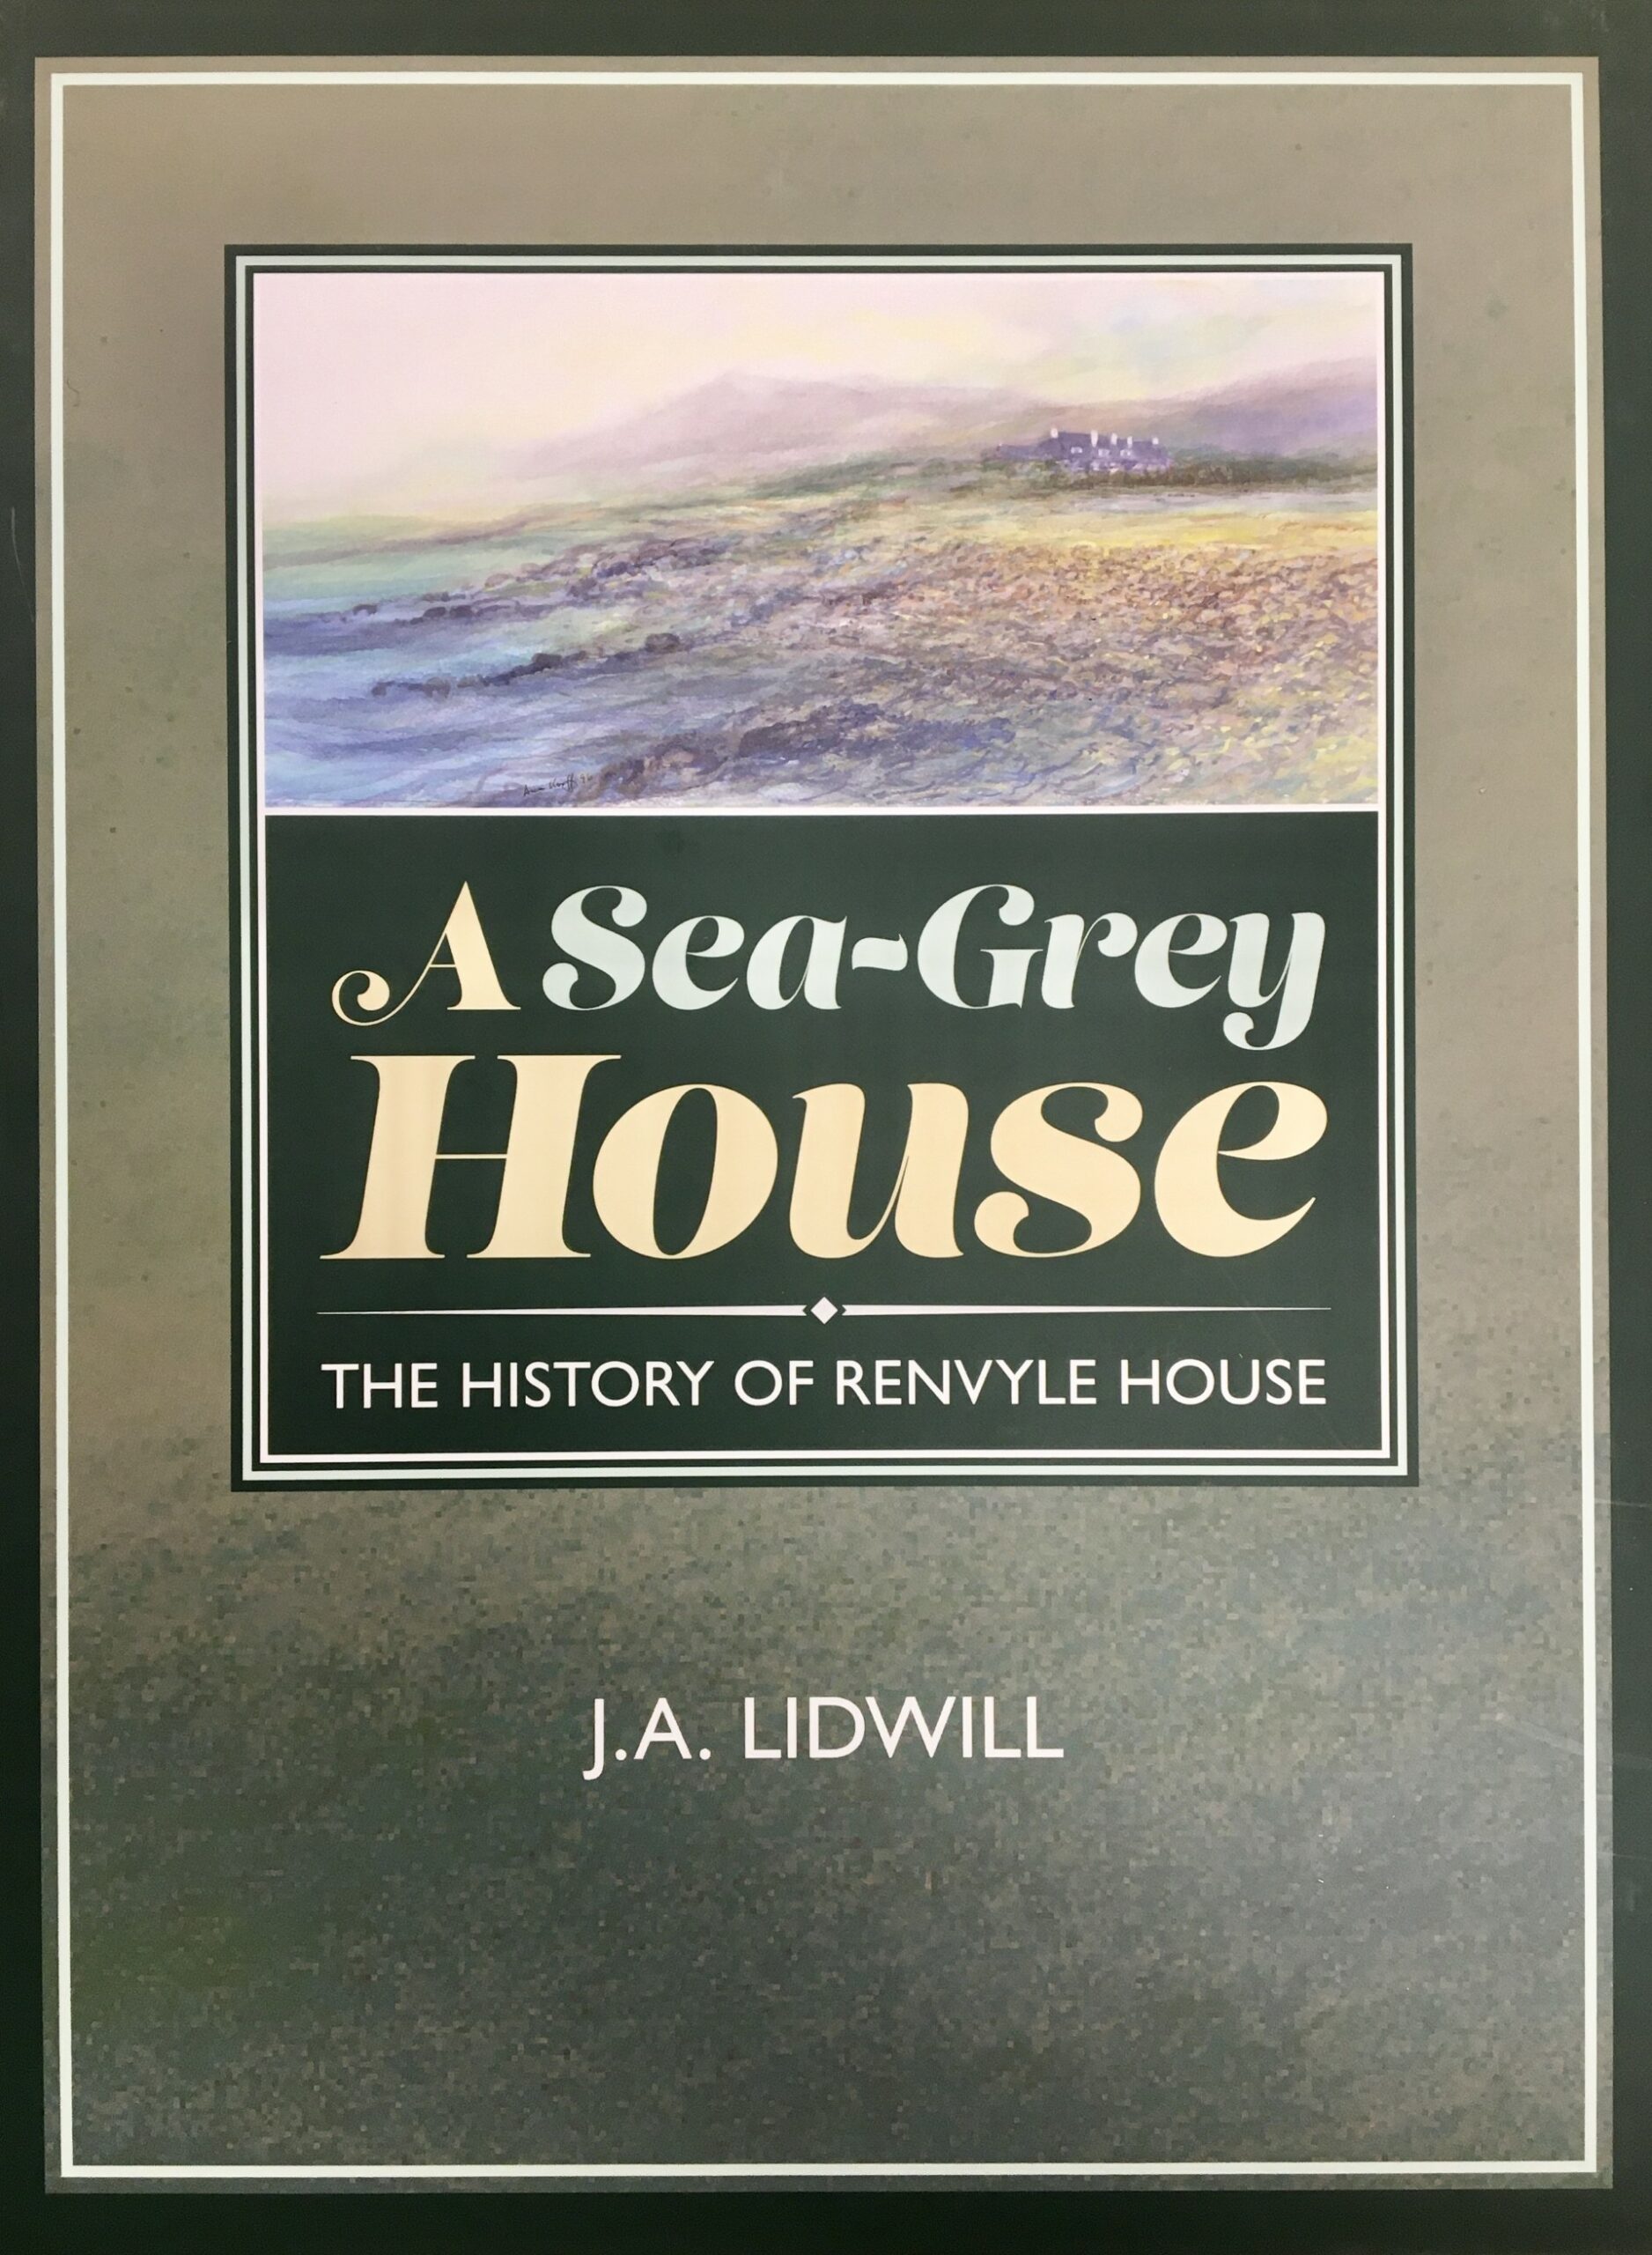 A Sea-Grey House : The History of Renvyle House by J.A. Lidwill